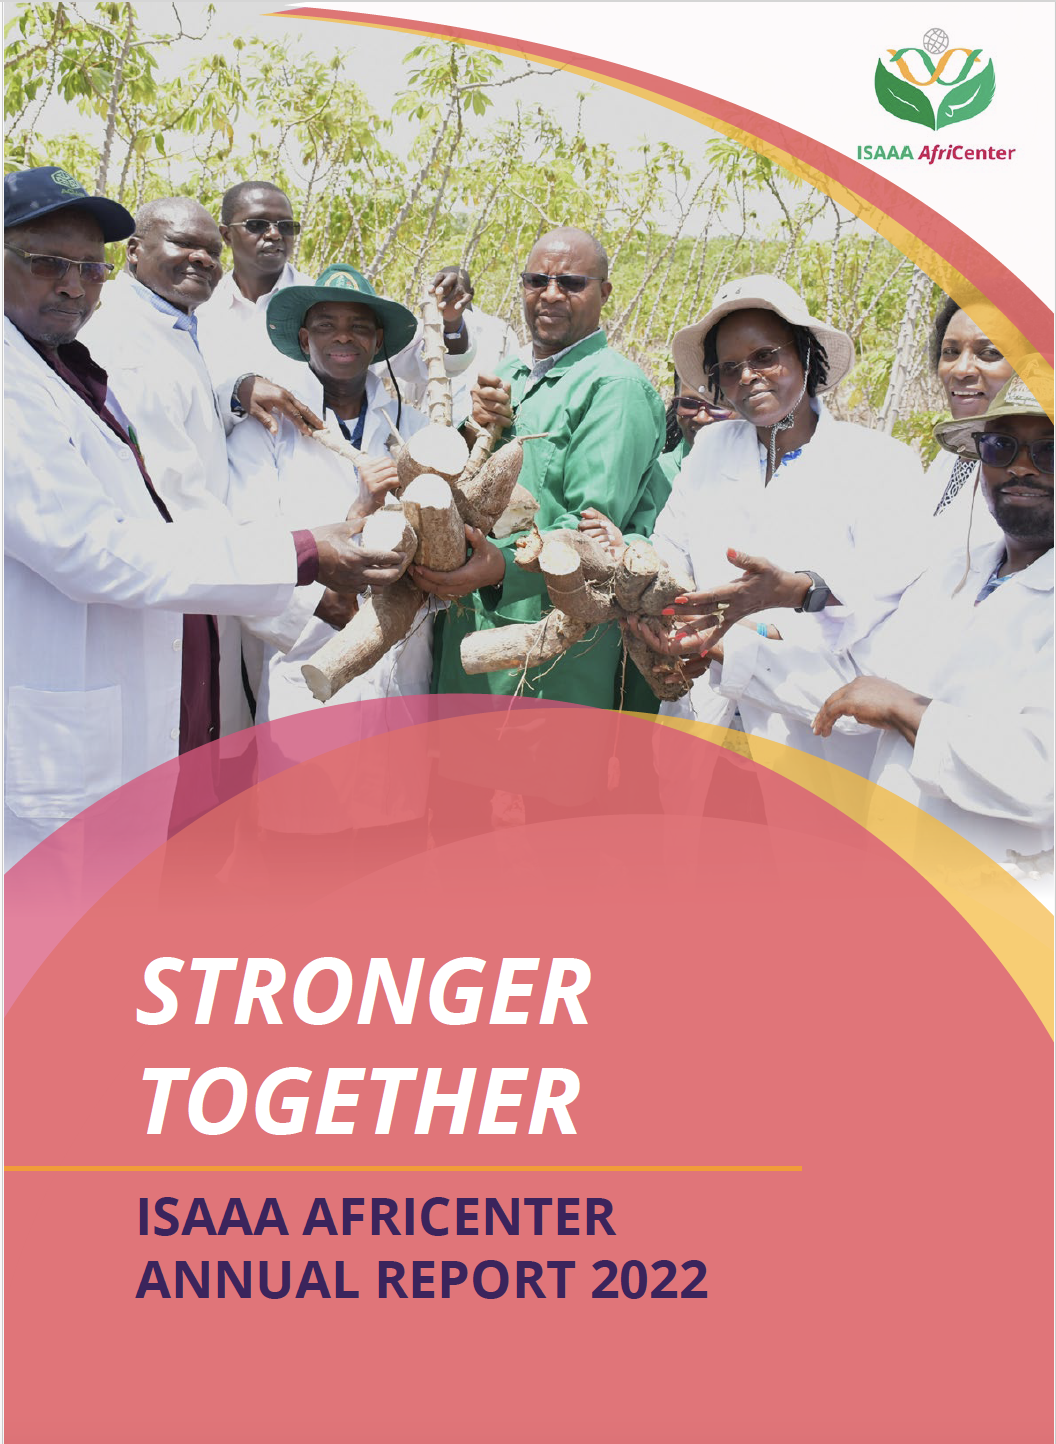 ISAAA AfriCenter Annual Report 2022